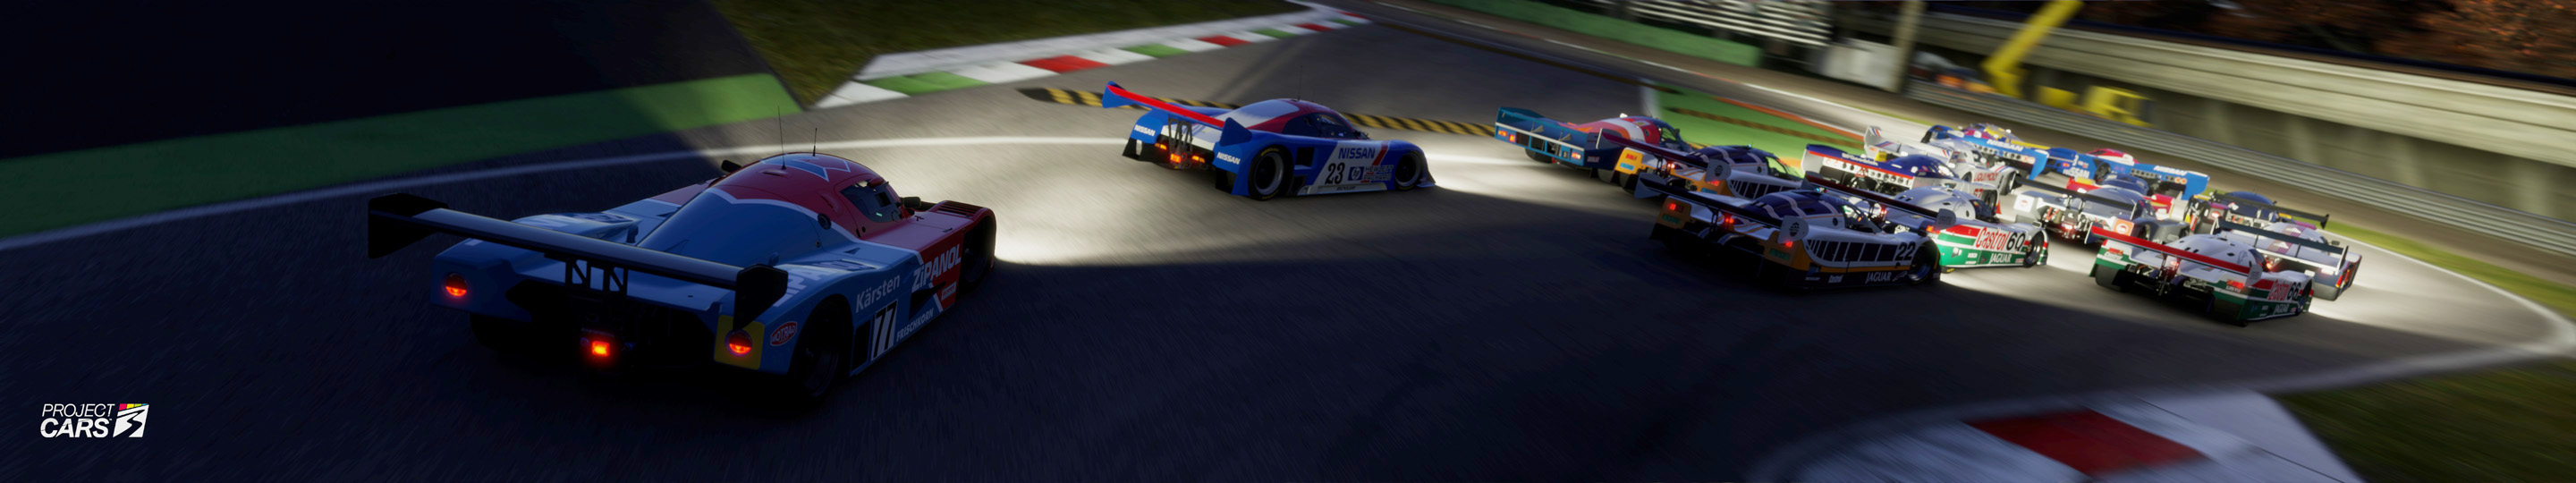 1 PROJECT CARS GROUP C at MONZA copy.jpg